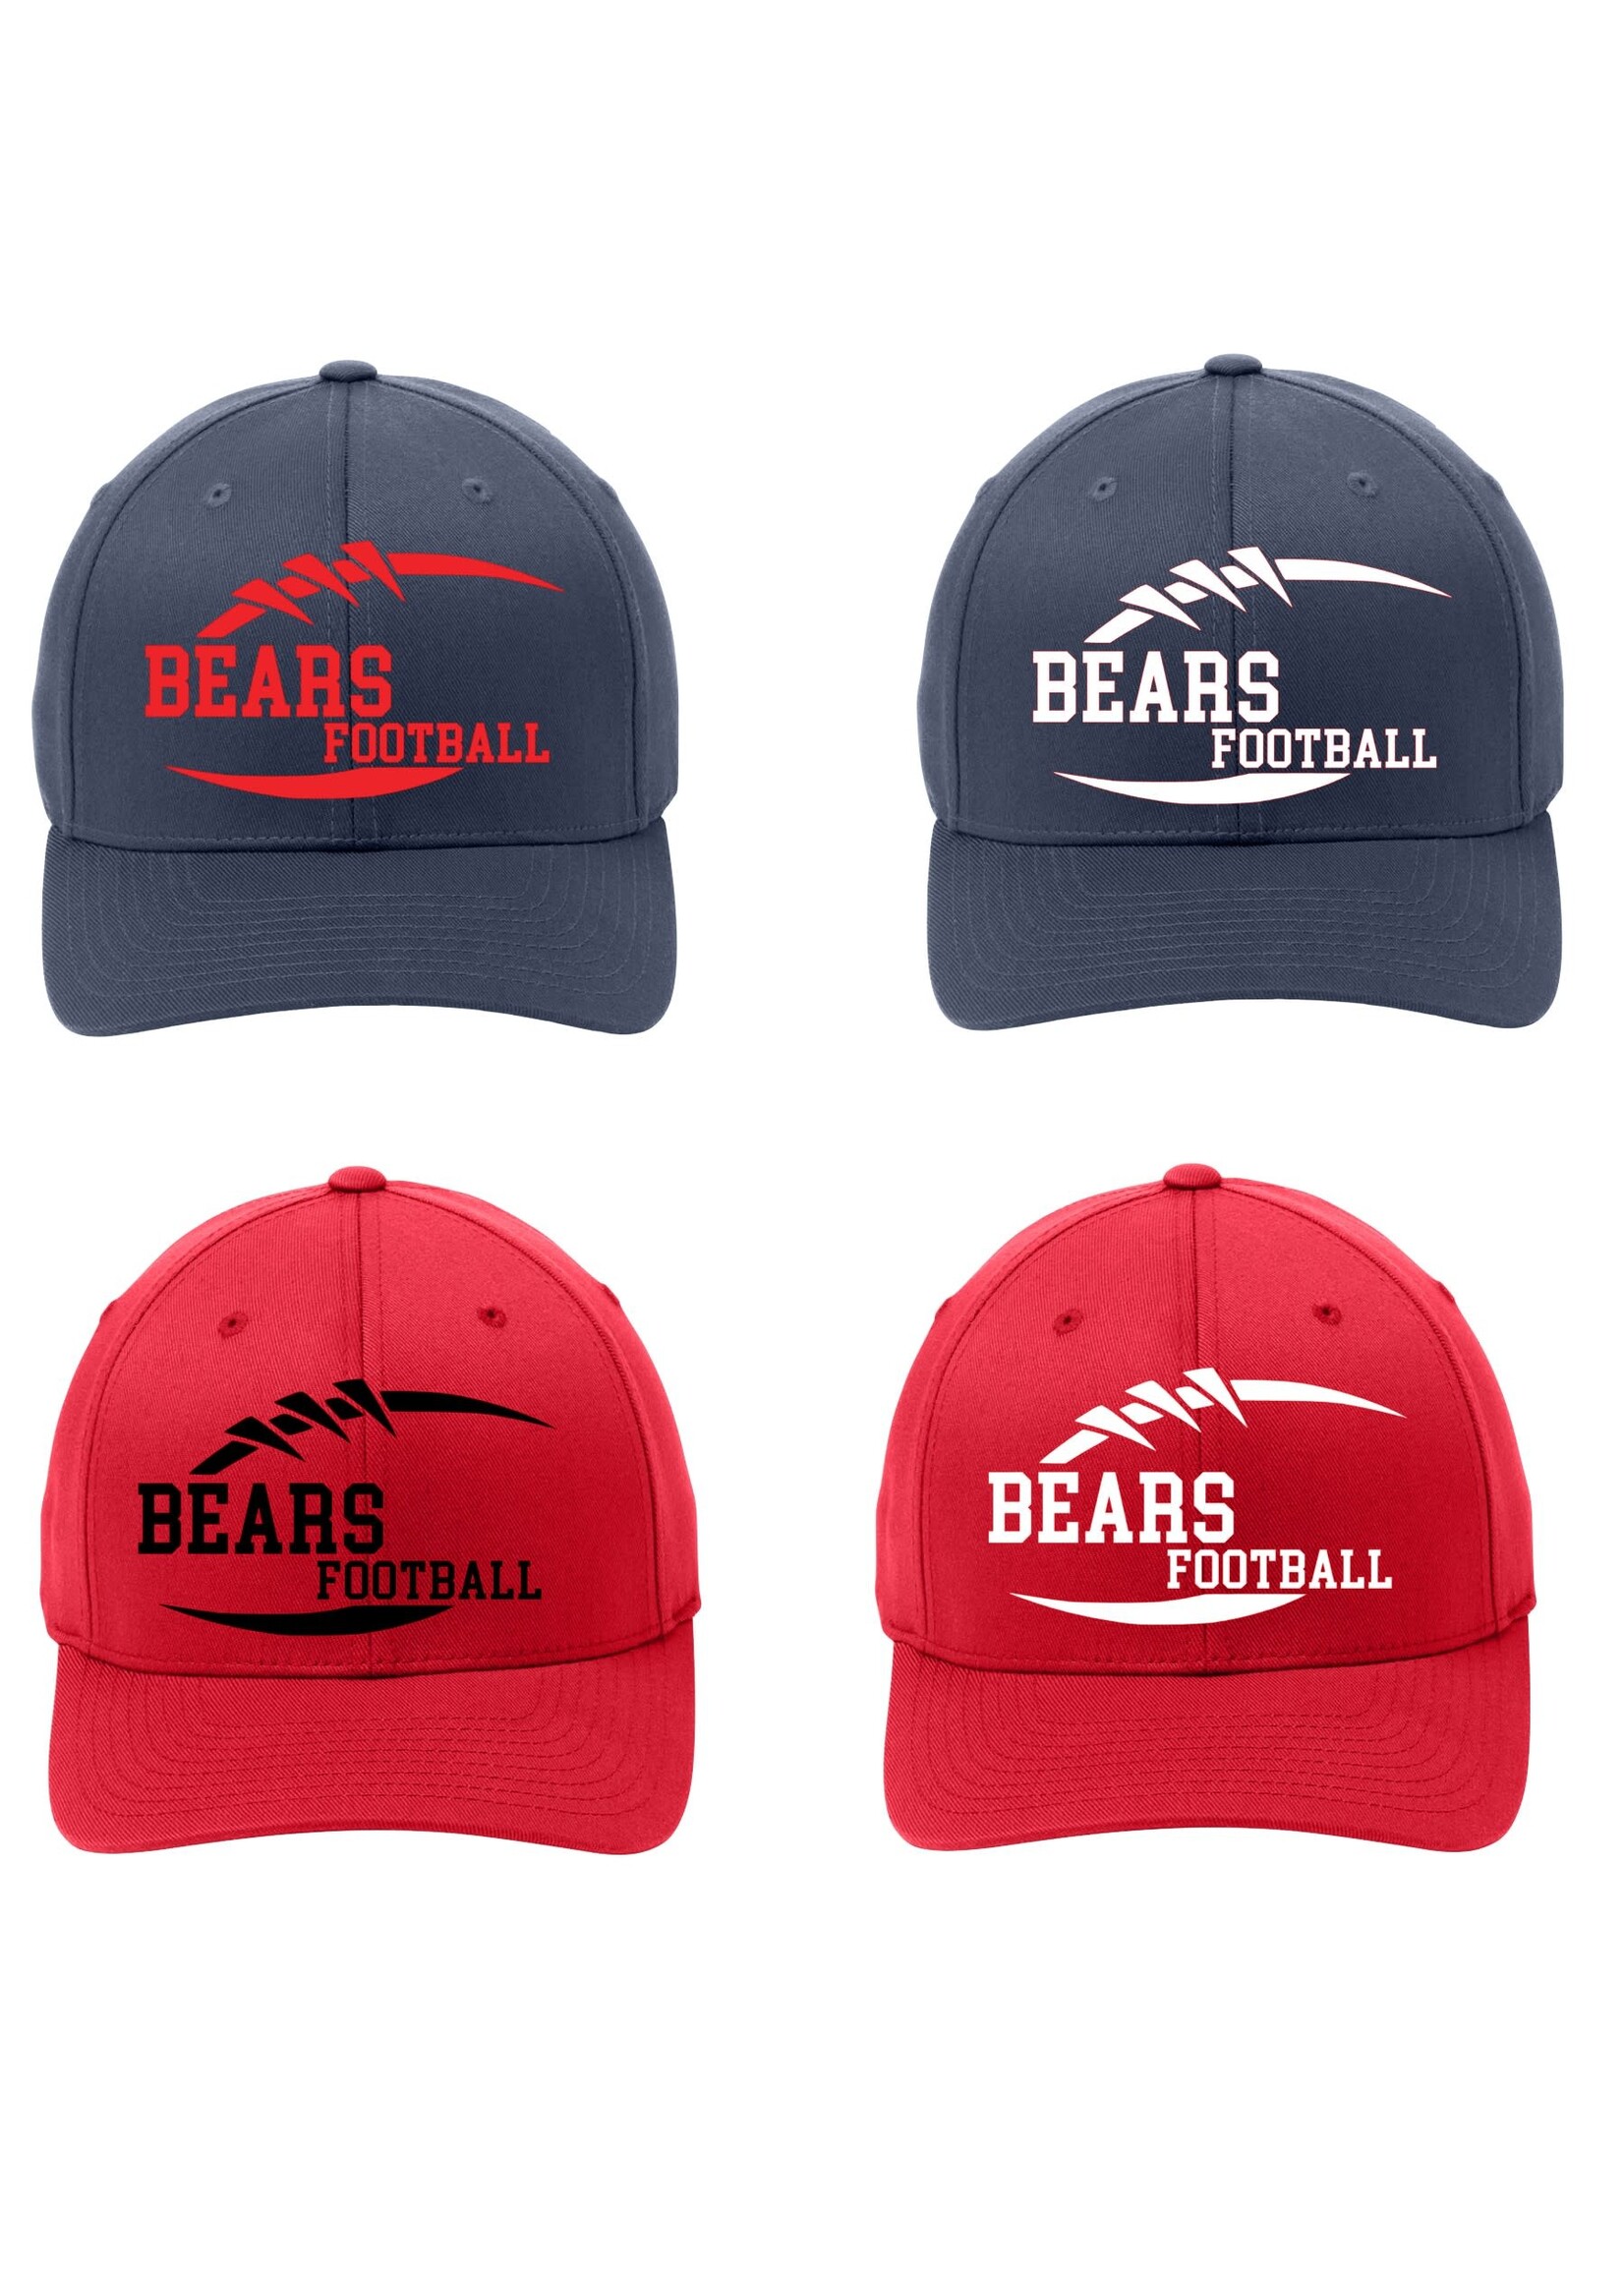 Bears Football fitted hat